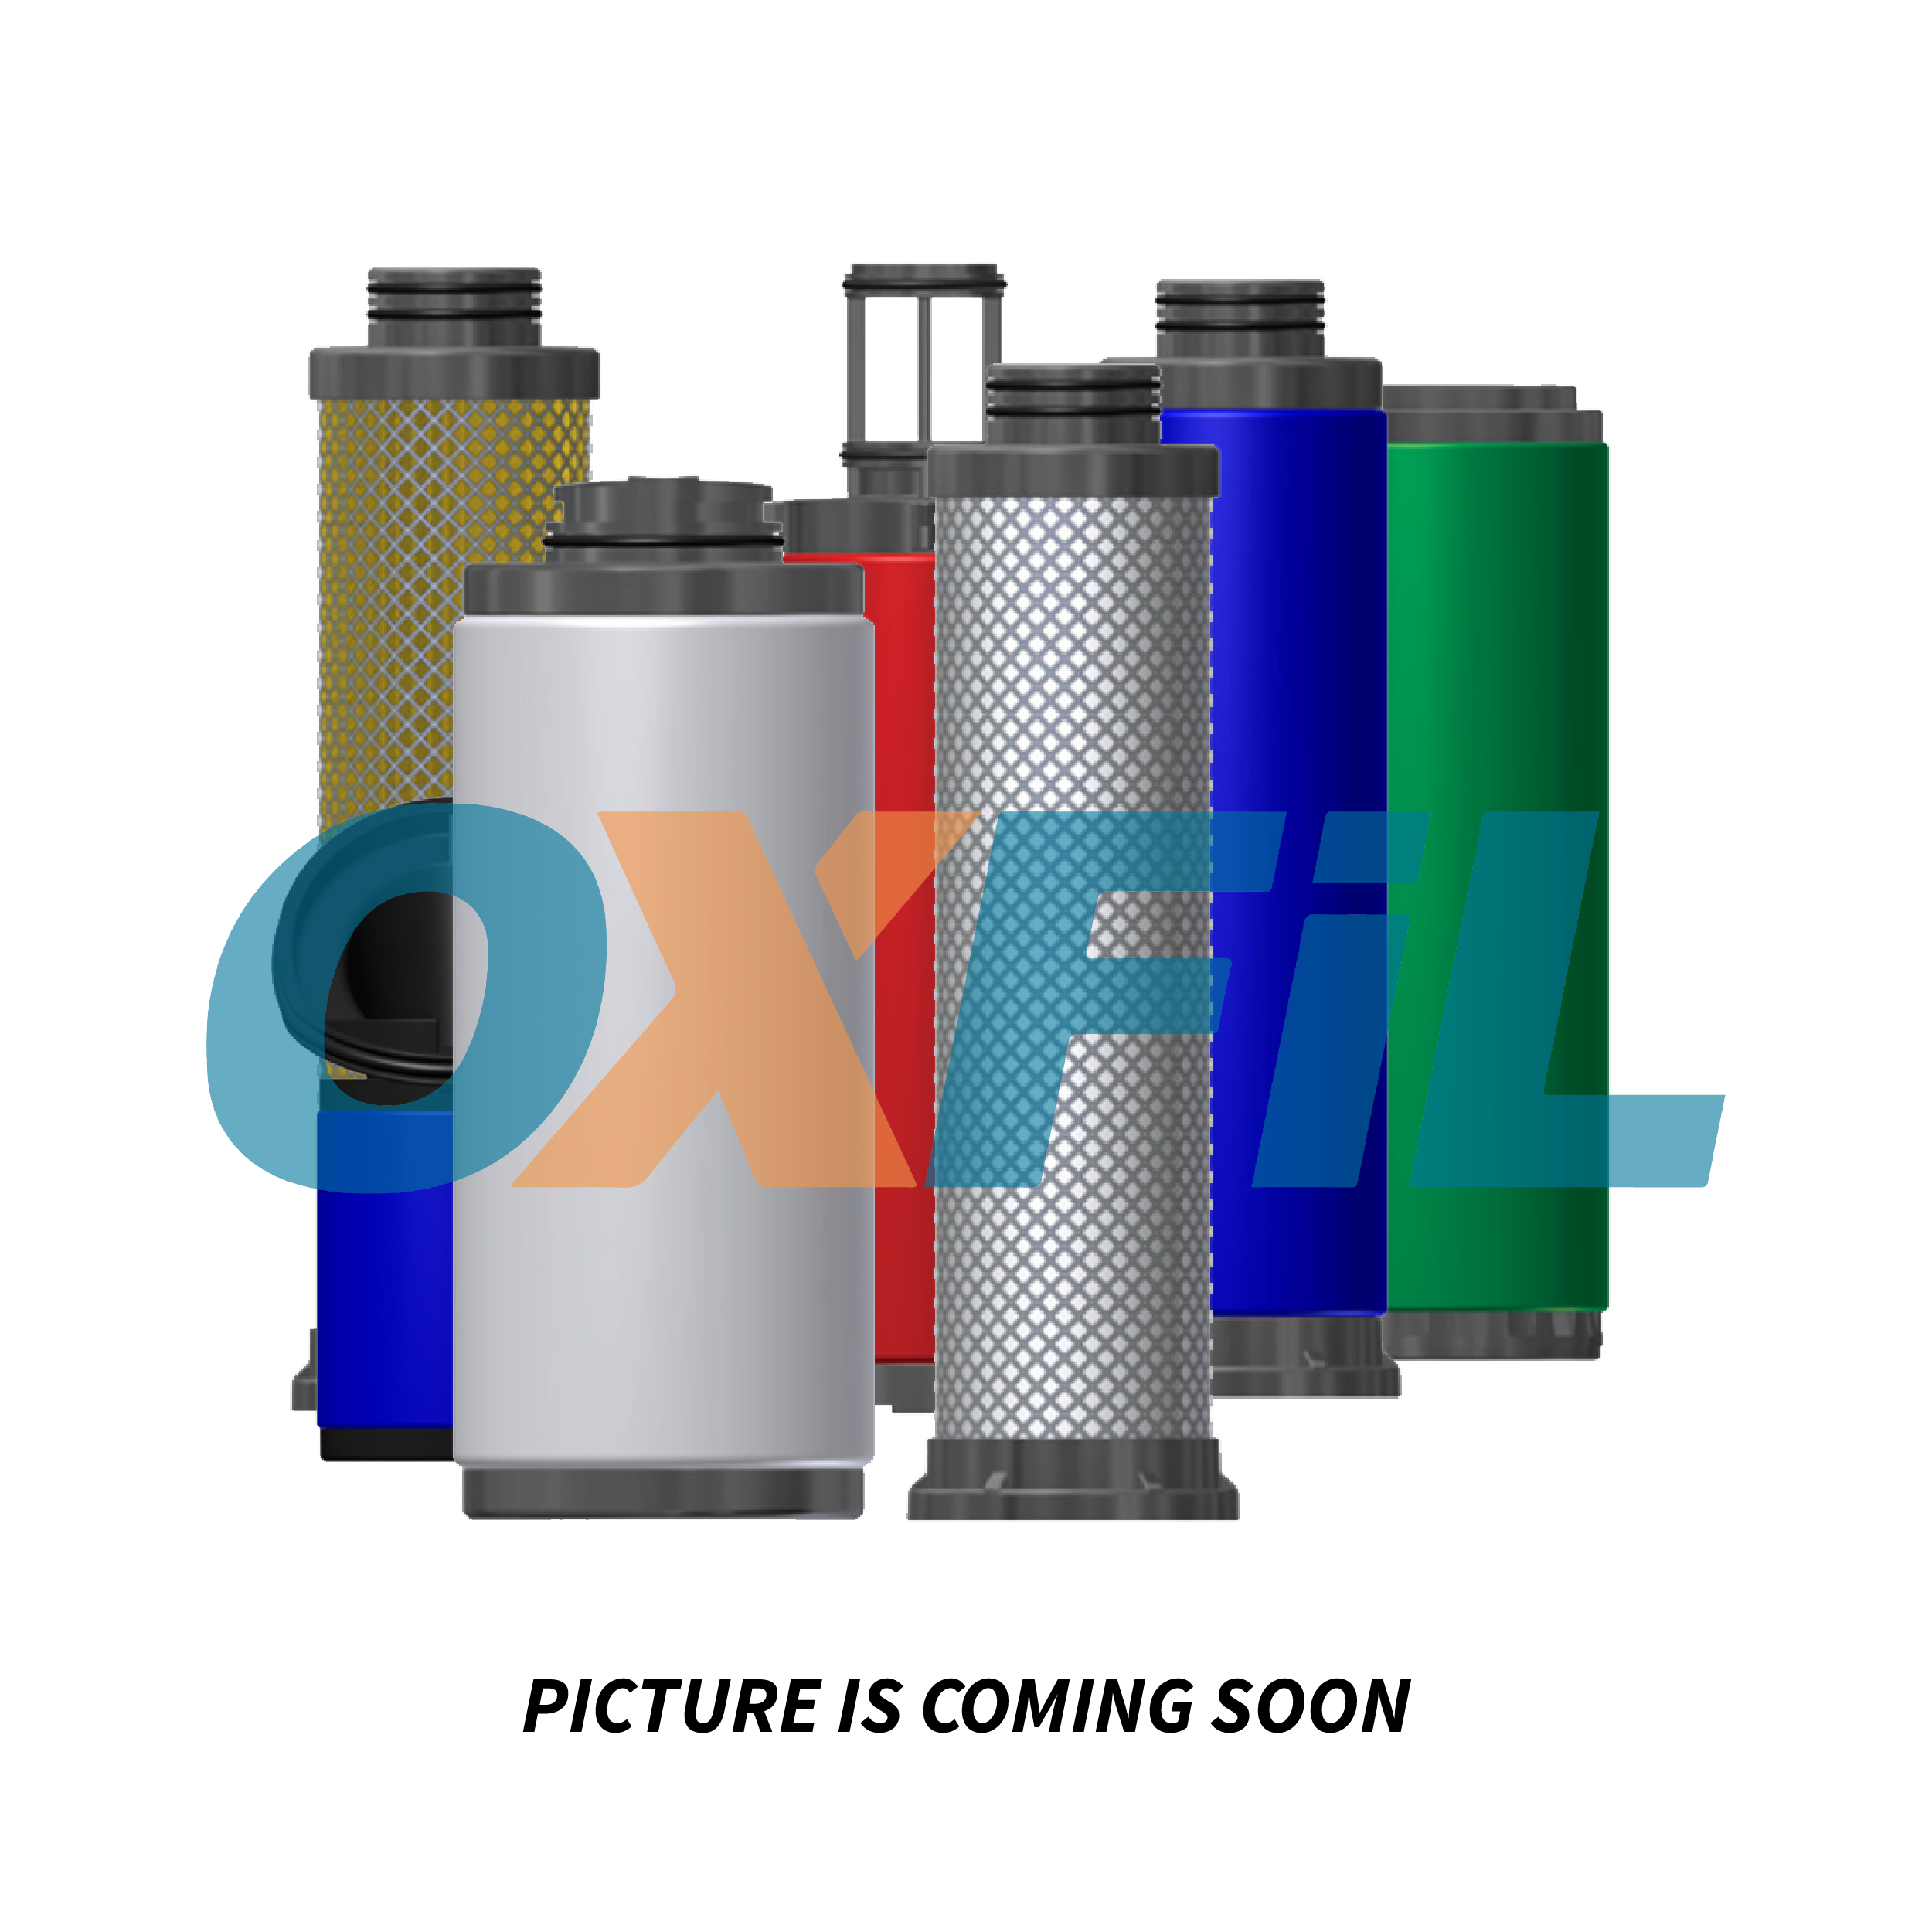 Related product IF.4938 - In-line Filter